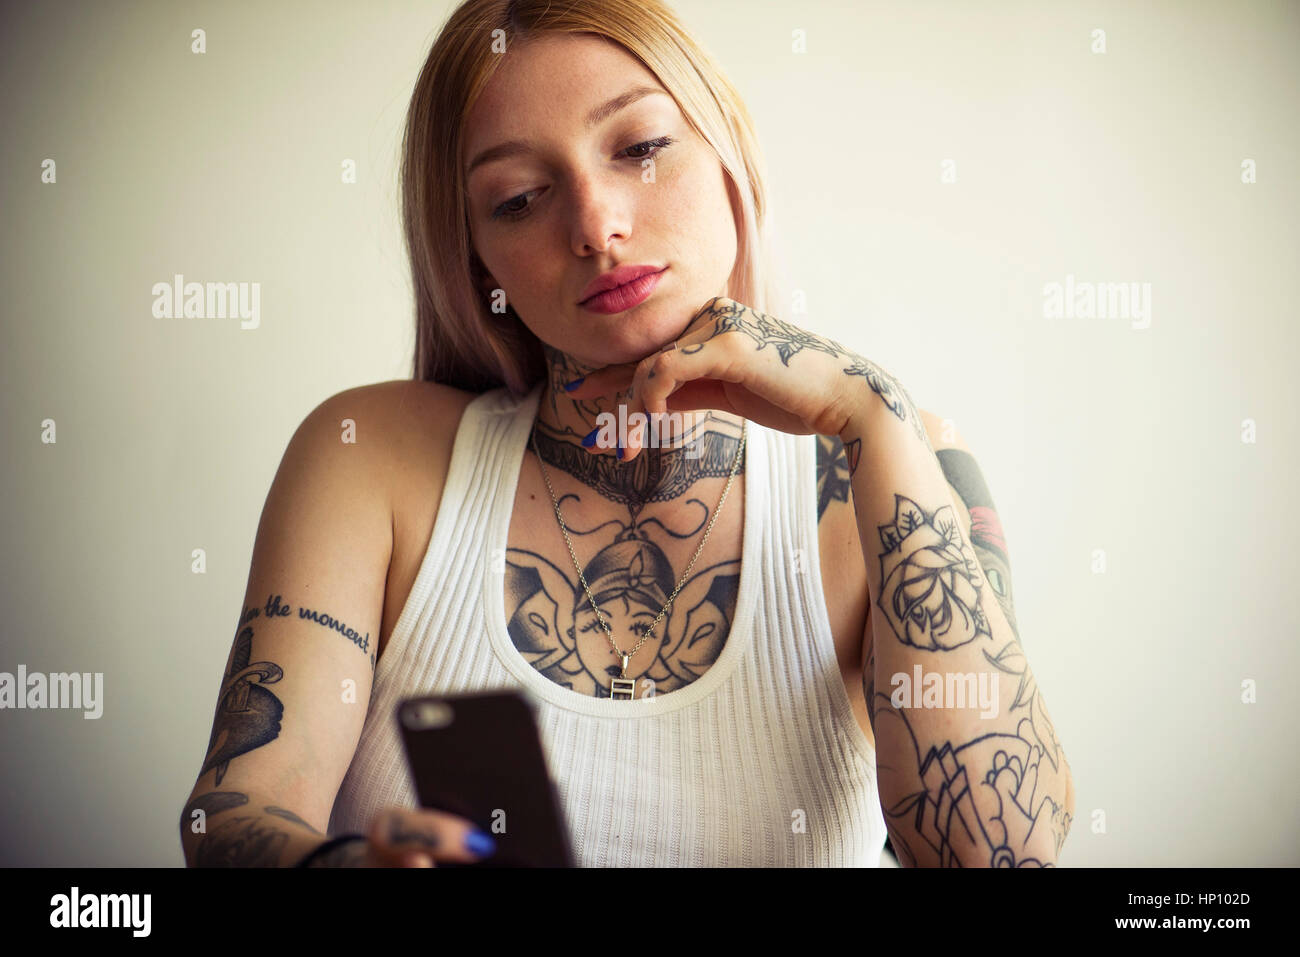 Tattooed Woman using smartphone Banque D'Images